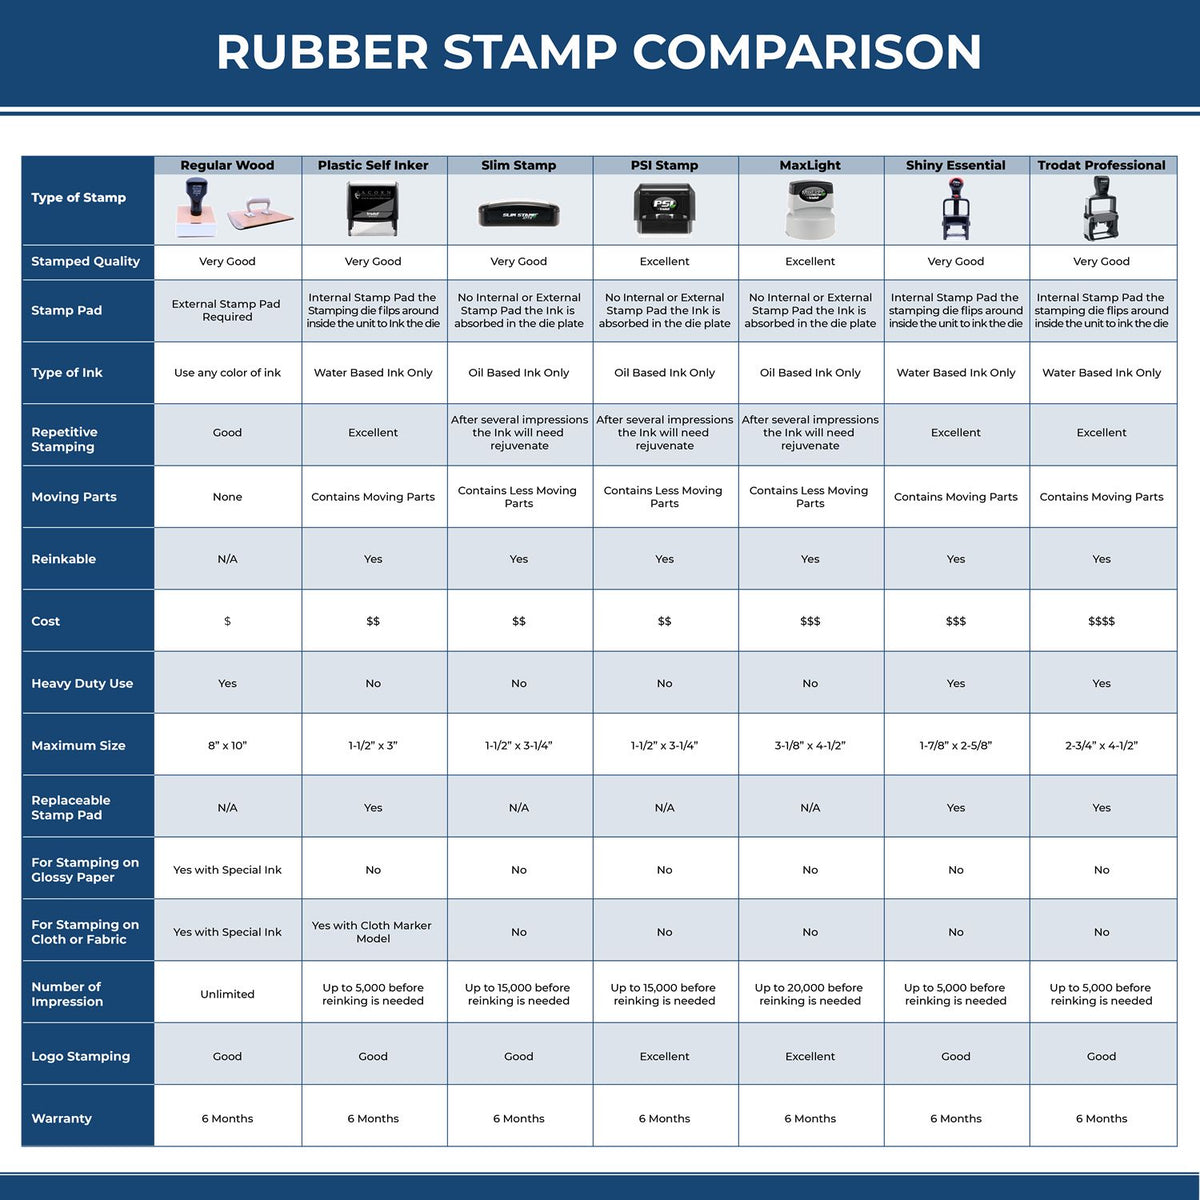 A comparison chart for the different types of mount models available for the Super Slim Alaska Notary Public Stamp.